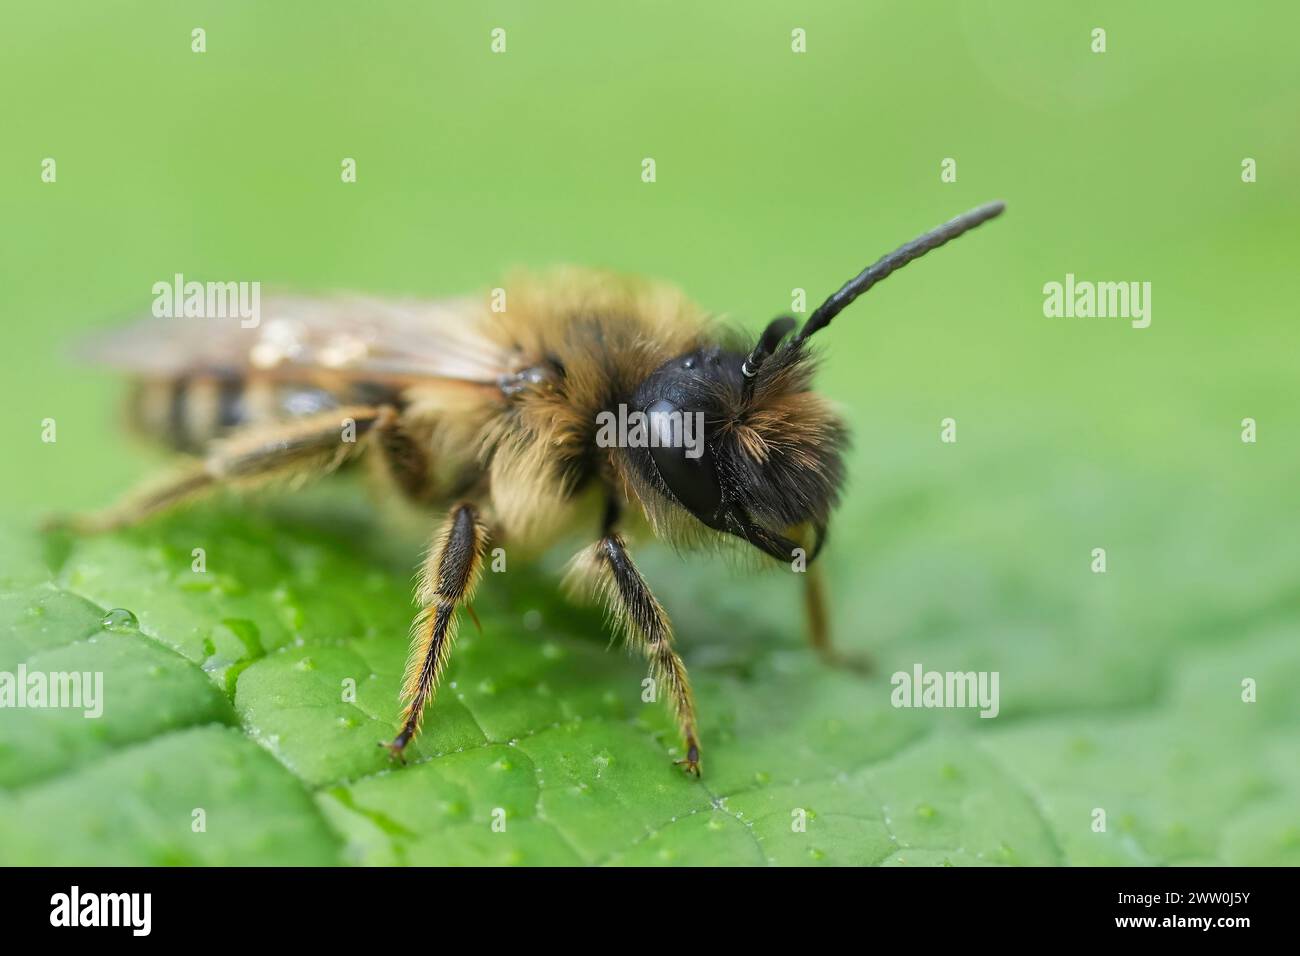 Natural detailed closeup on a male yellow-legged mining bee, Andrena flavipes on a green leaf Stock Photo